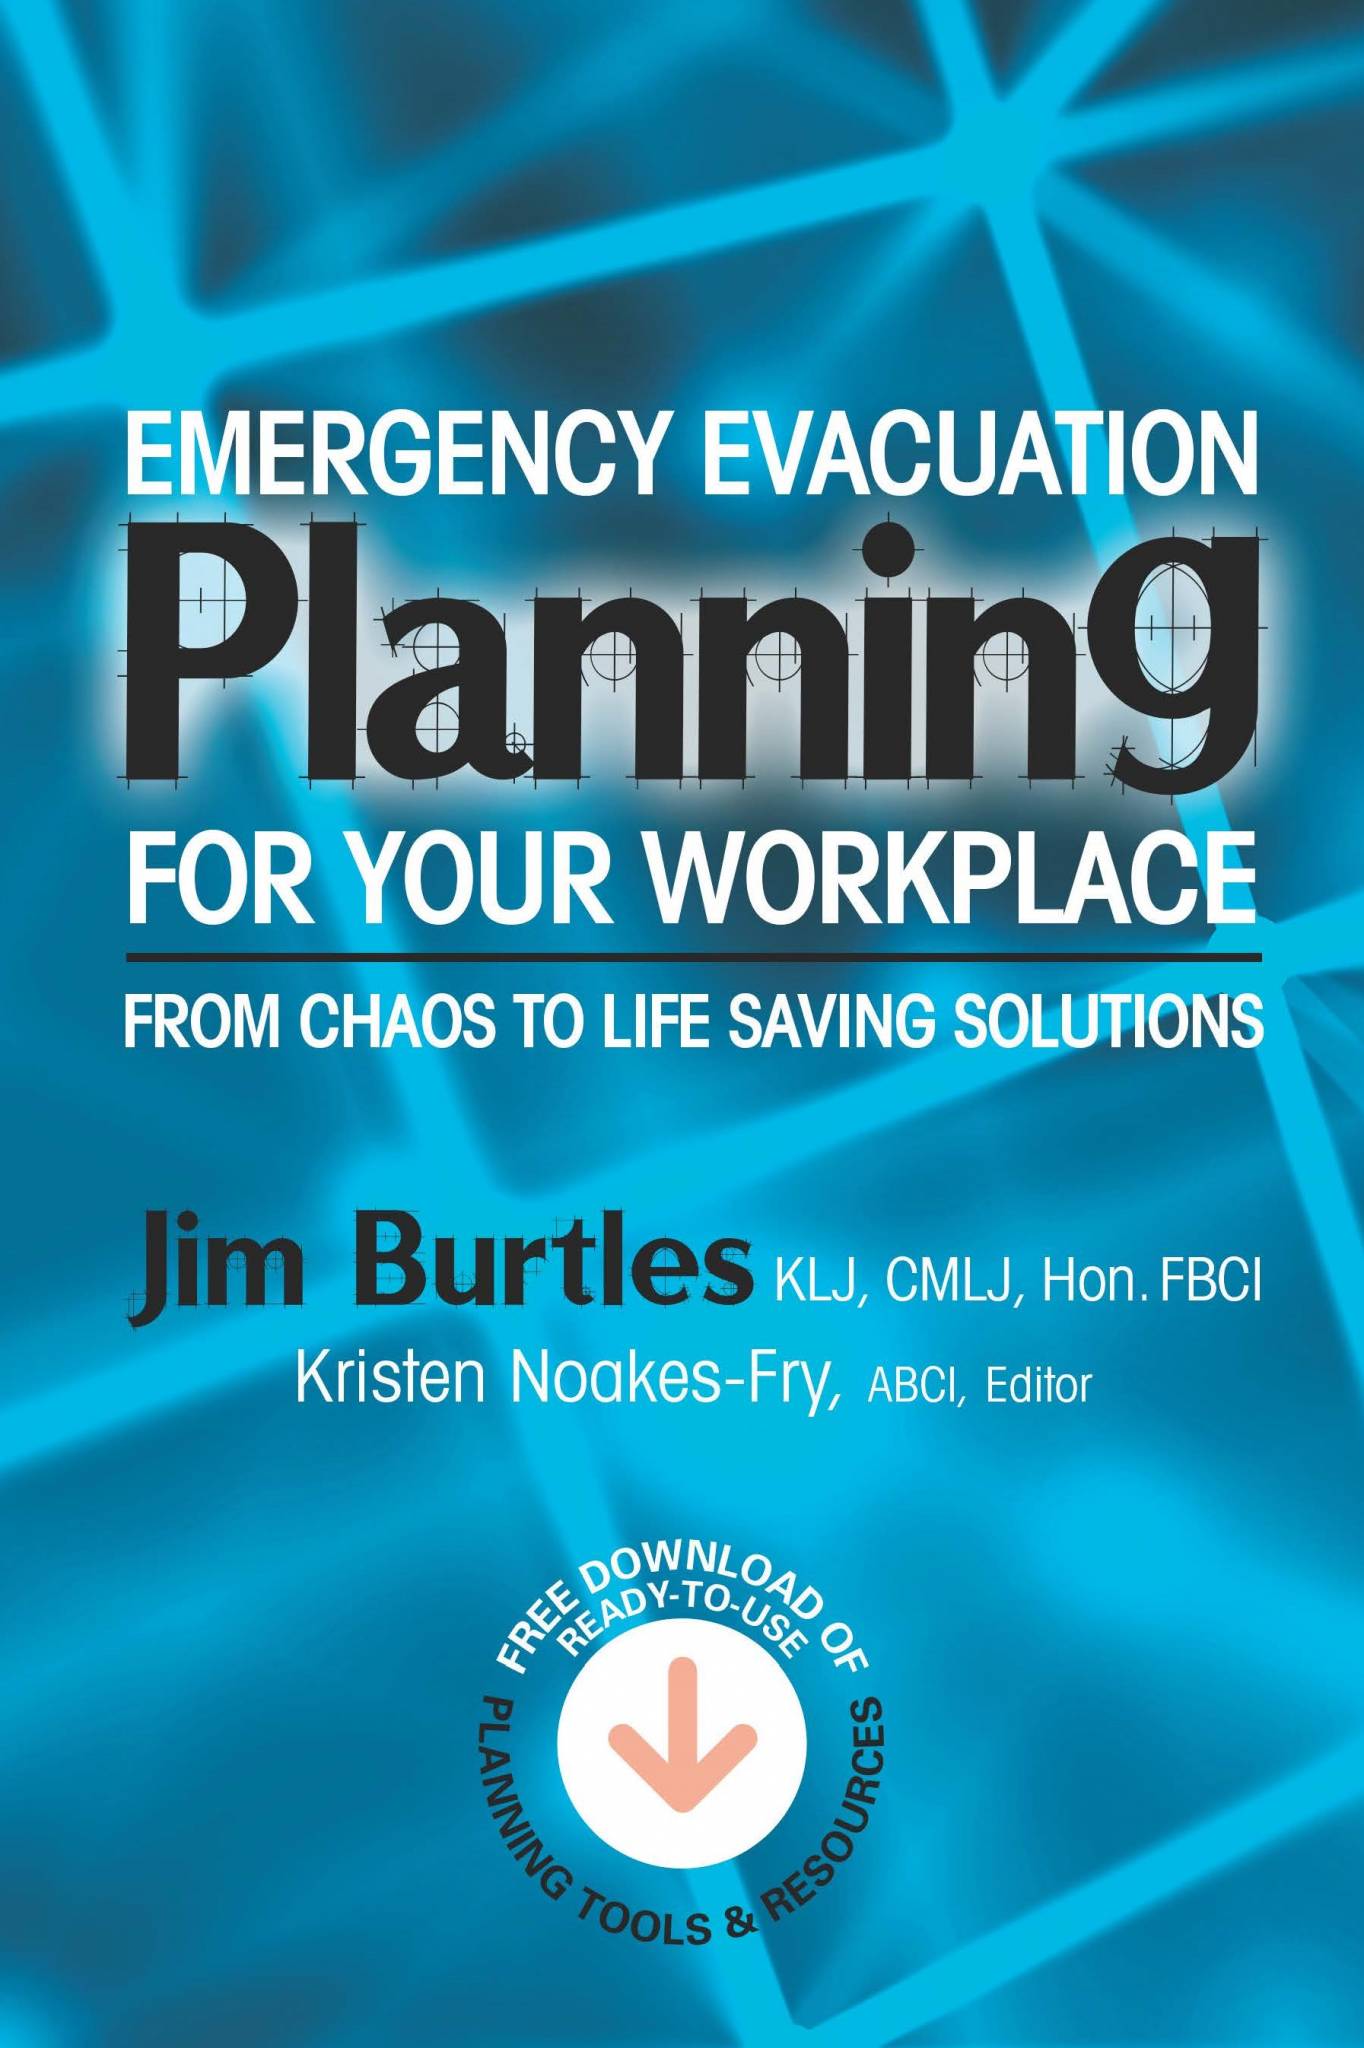 emergency-evacuation-planning-for-your-workplace-from-chaos-to-life-saving-solutions-by-jim-burltes-rothstein-publishing